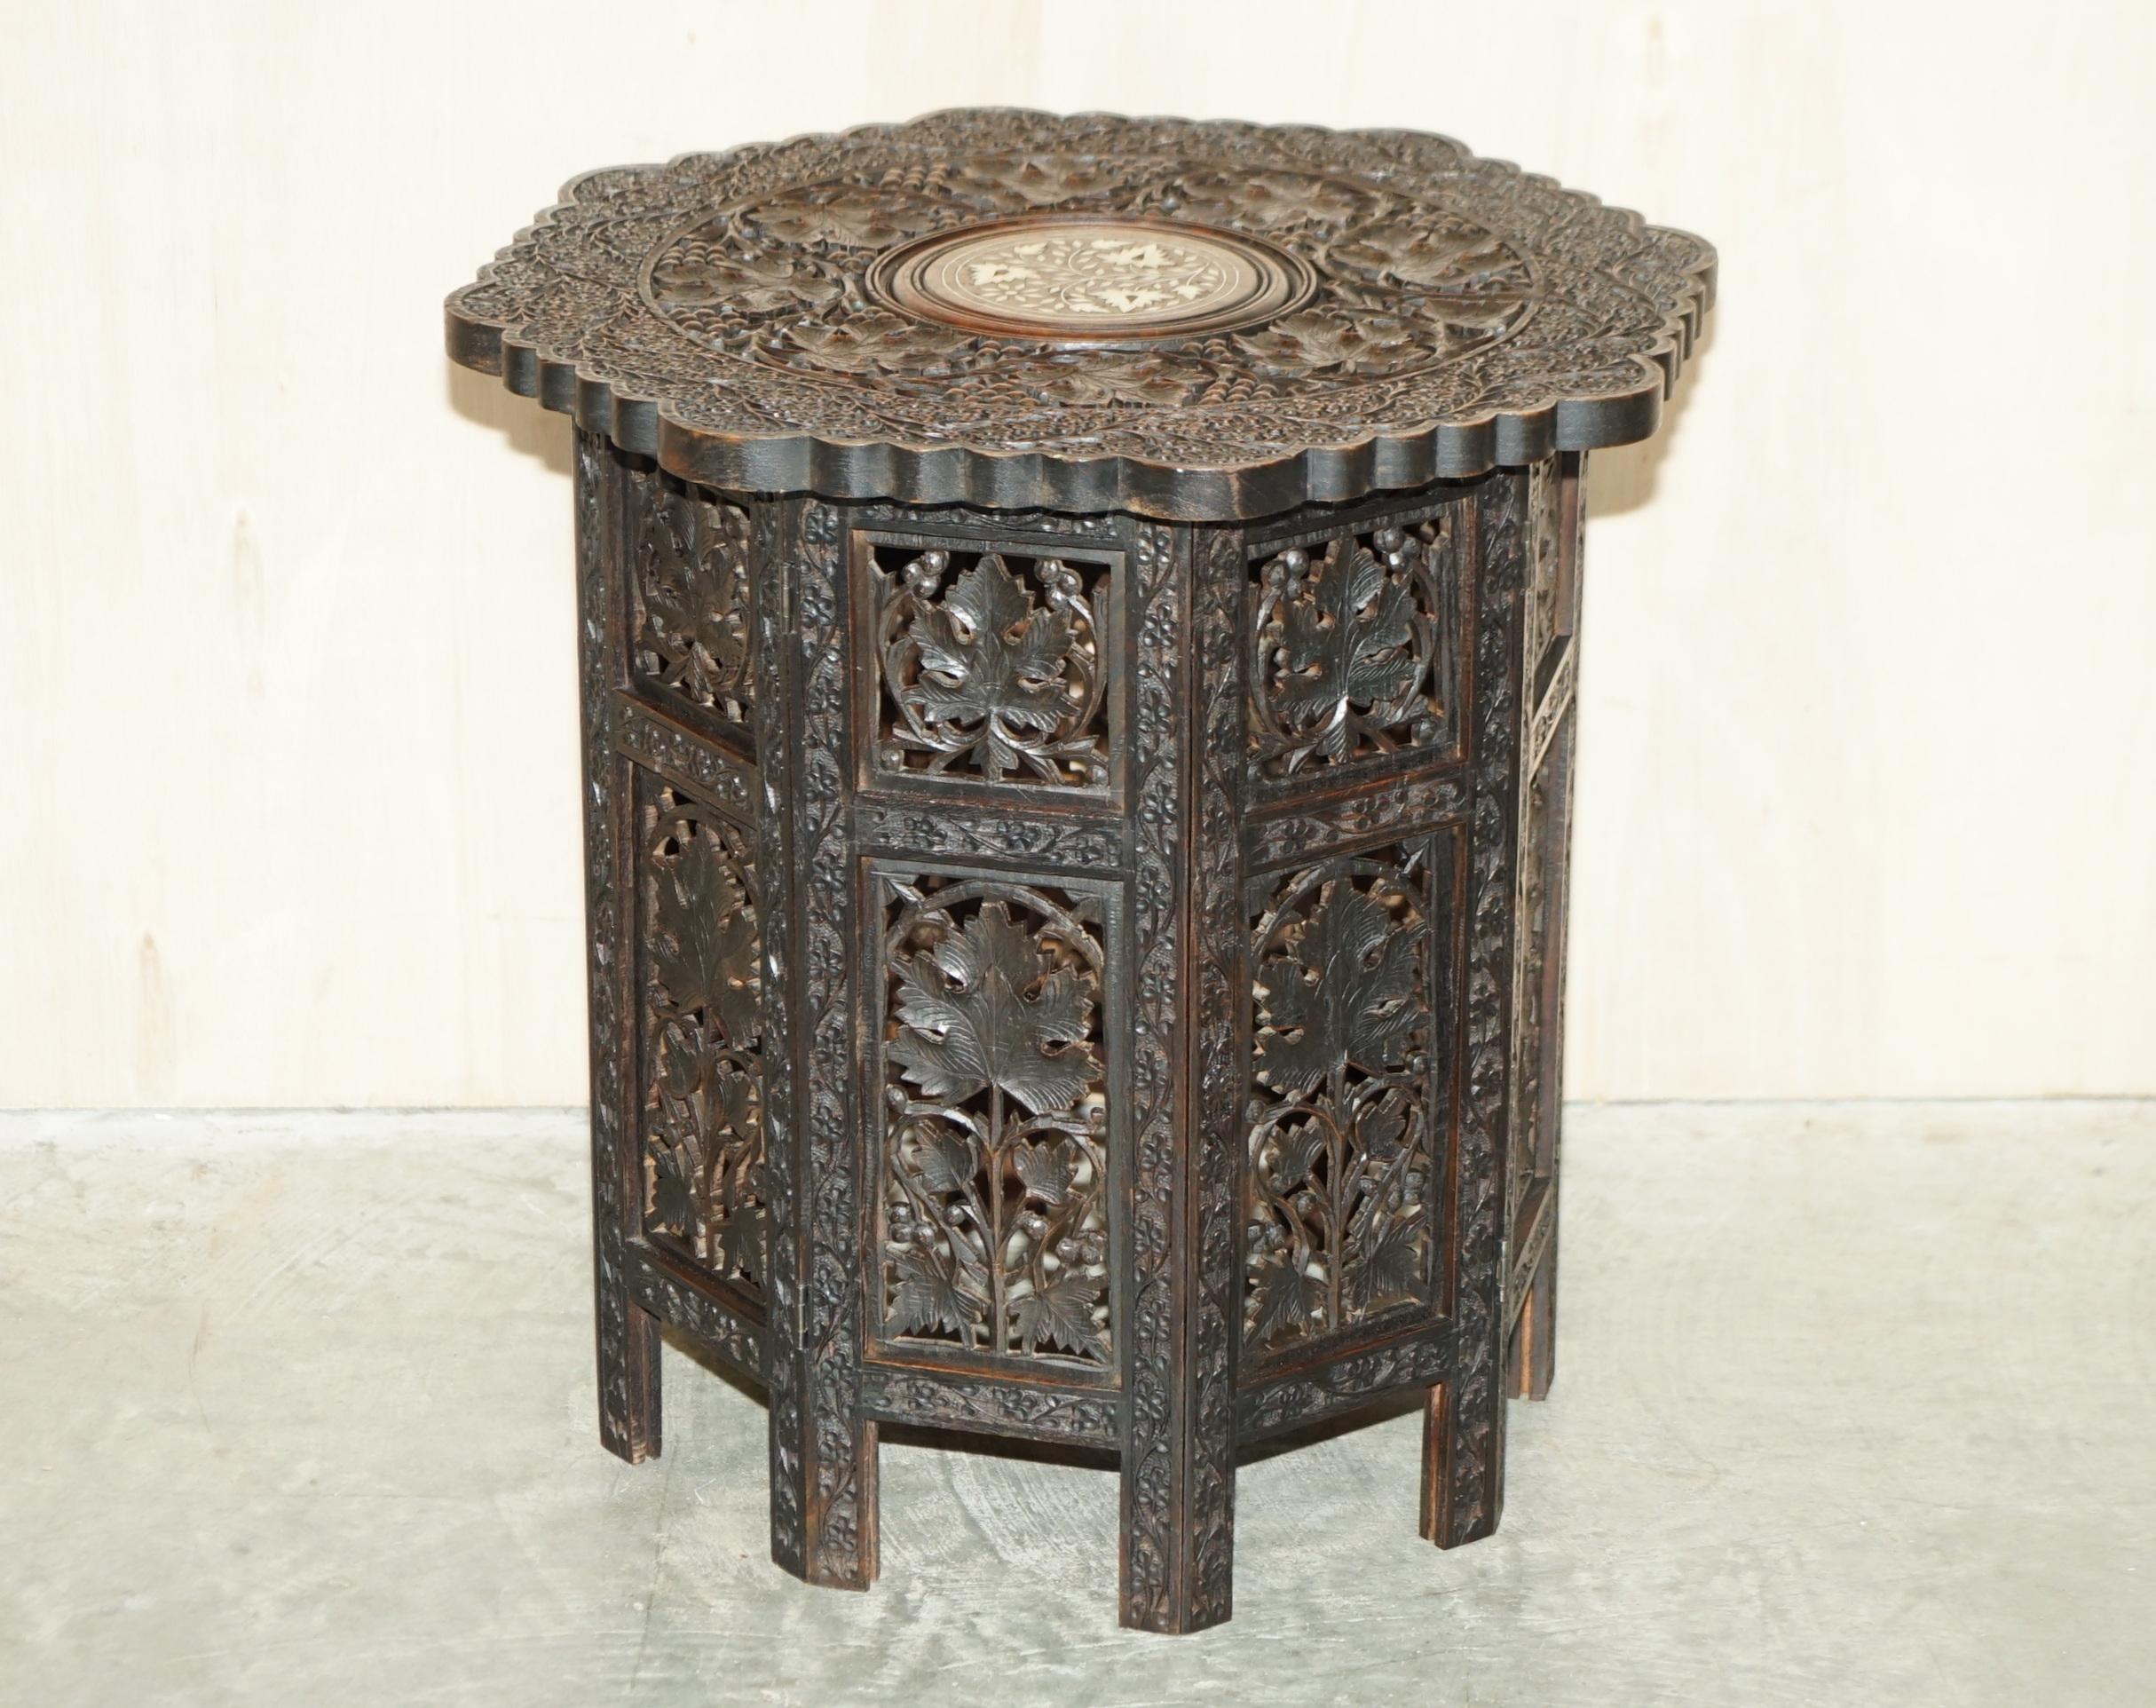 We are delighted to offer this lovely hand carved from solid Rosewood Burmese side table of large proportions.

A very good looking and decorative table, this would be used as a lamp wine or side table but it’s a bit larger than usual.

Carved